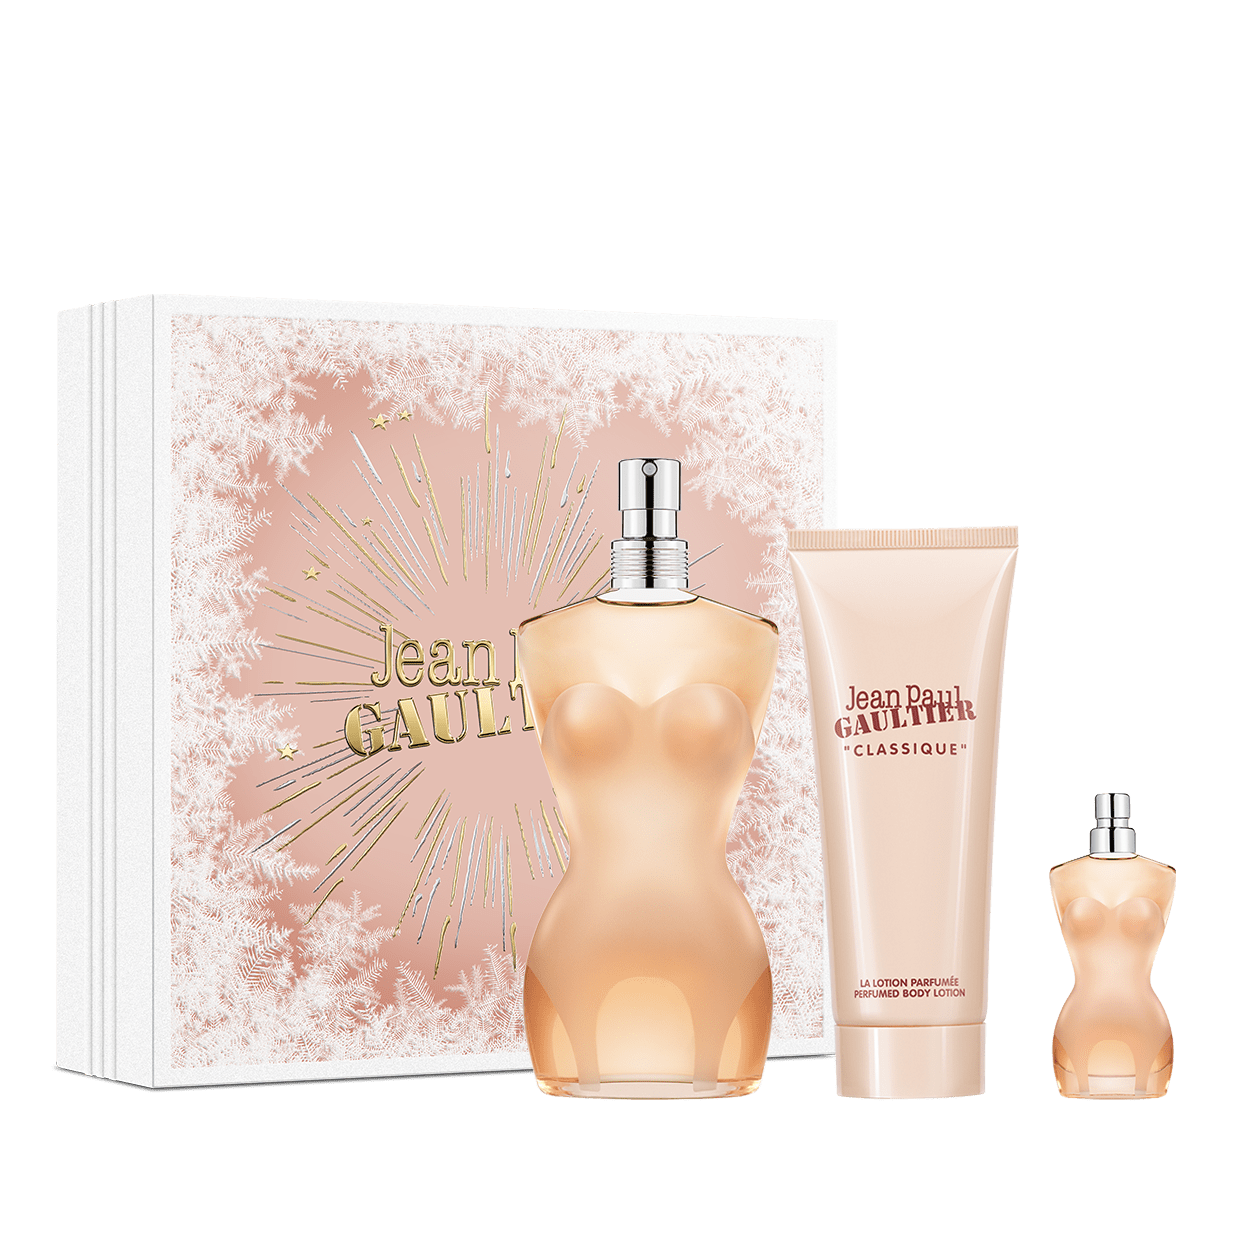 Classique 100 ml, Body lotion 75 ml, and Miniature 6 ml